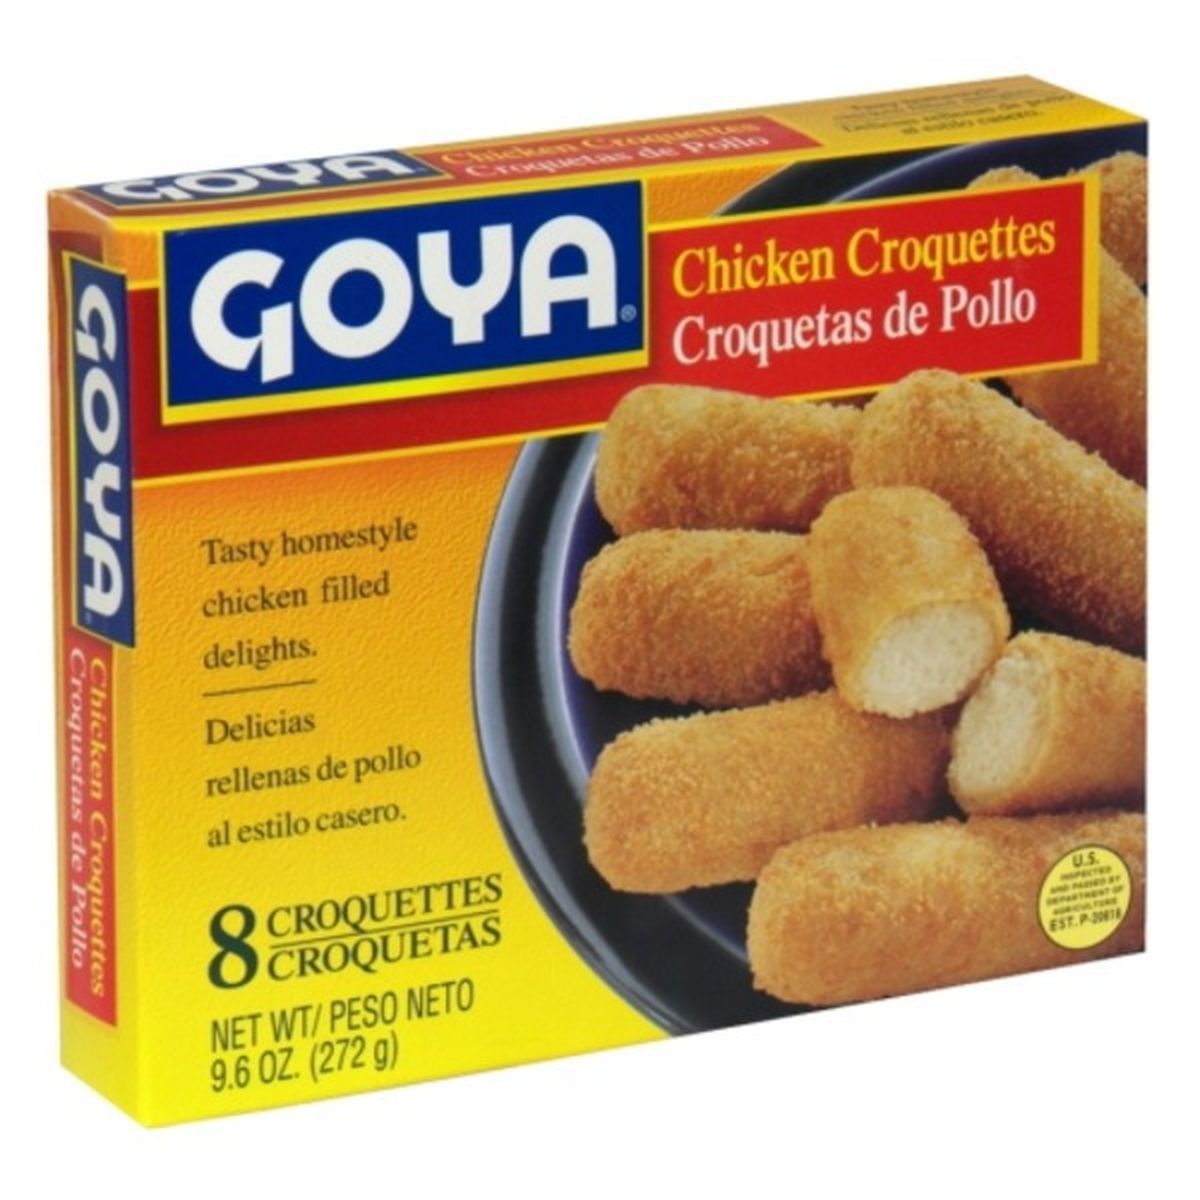 Calories in Goya Chicken Croquettes